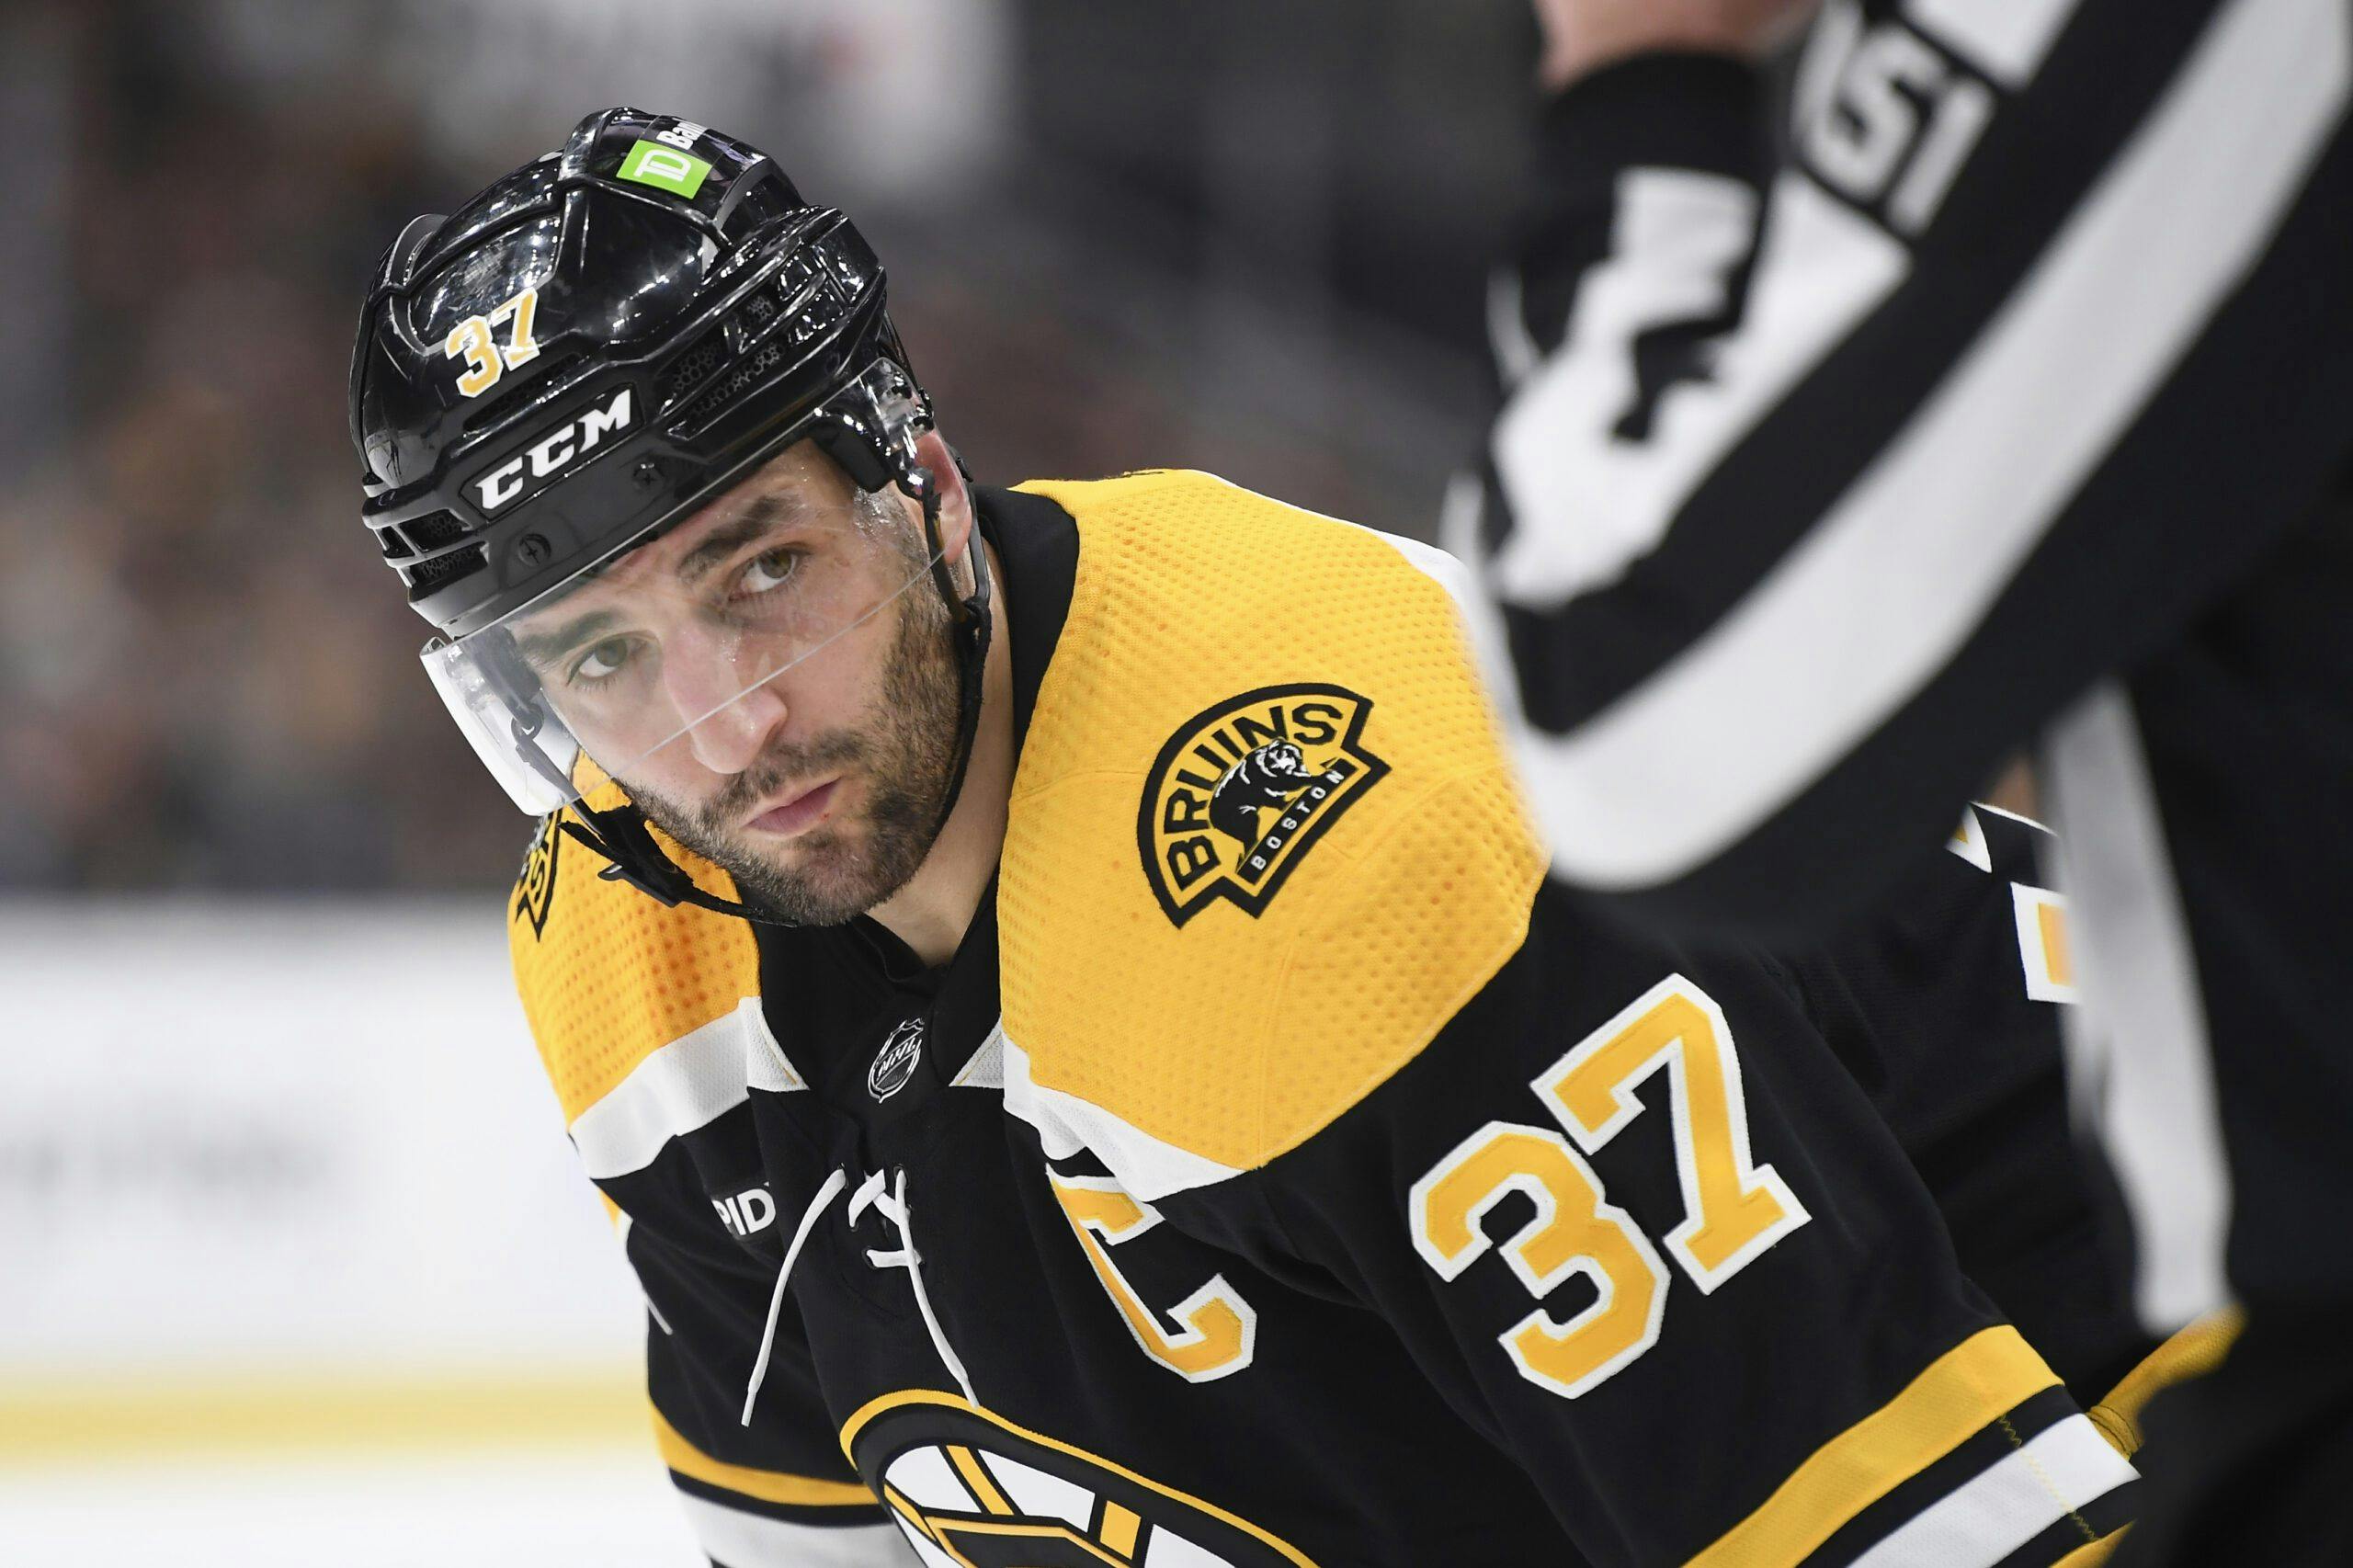 Patrice Bergeron leads off the ice, then on it